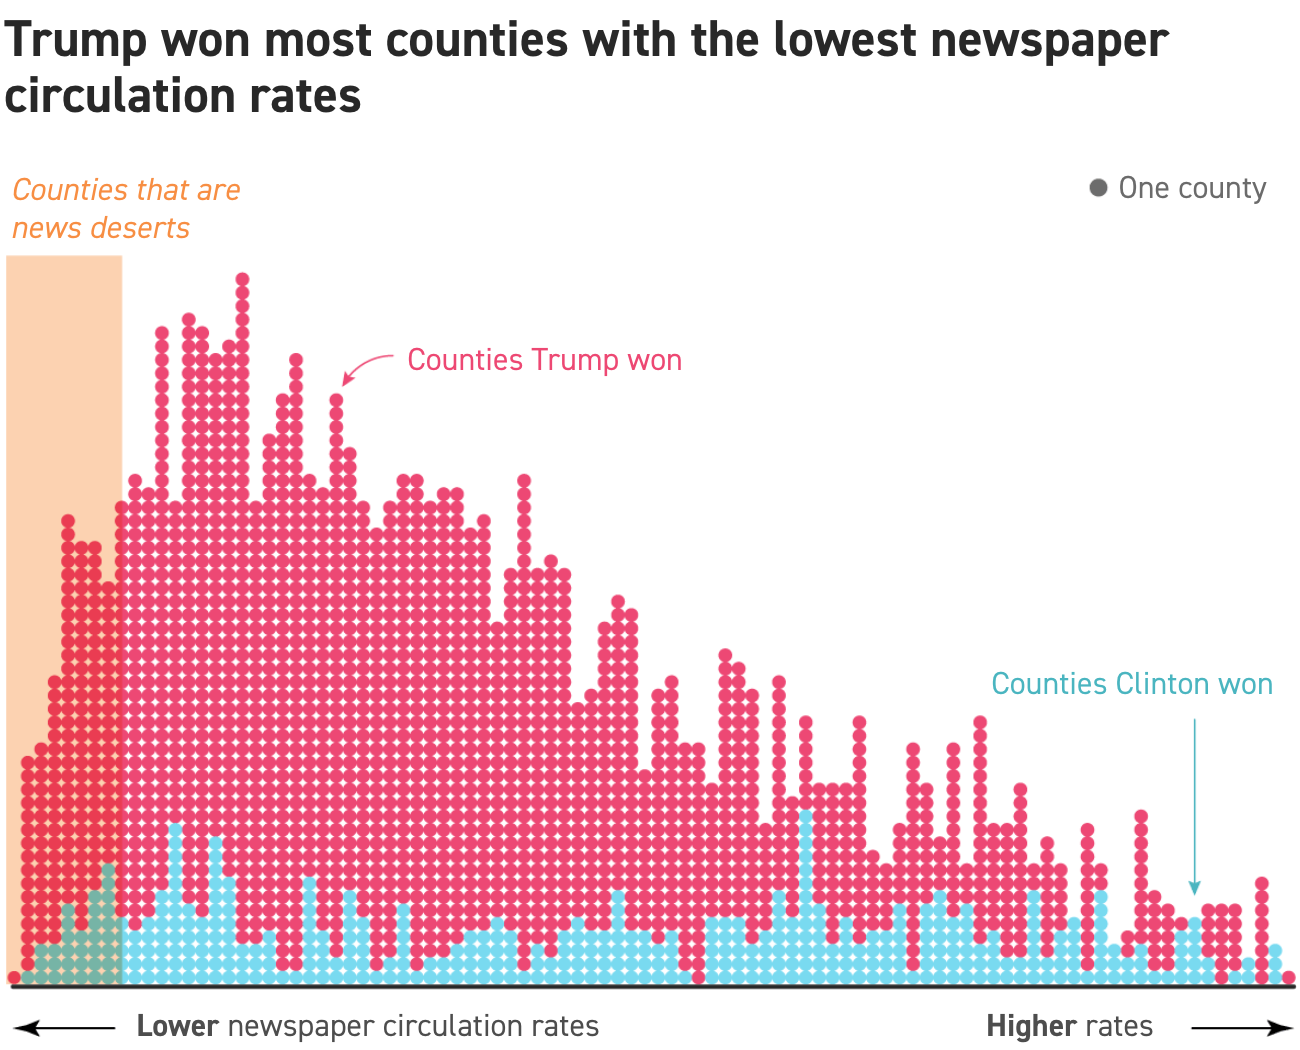 How the news deserts performed